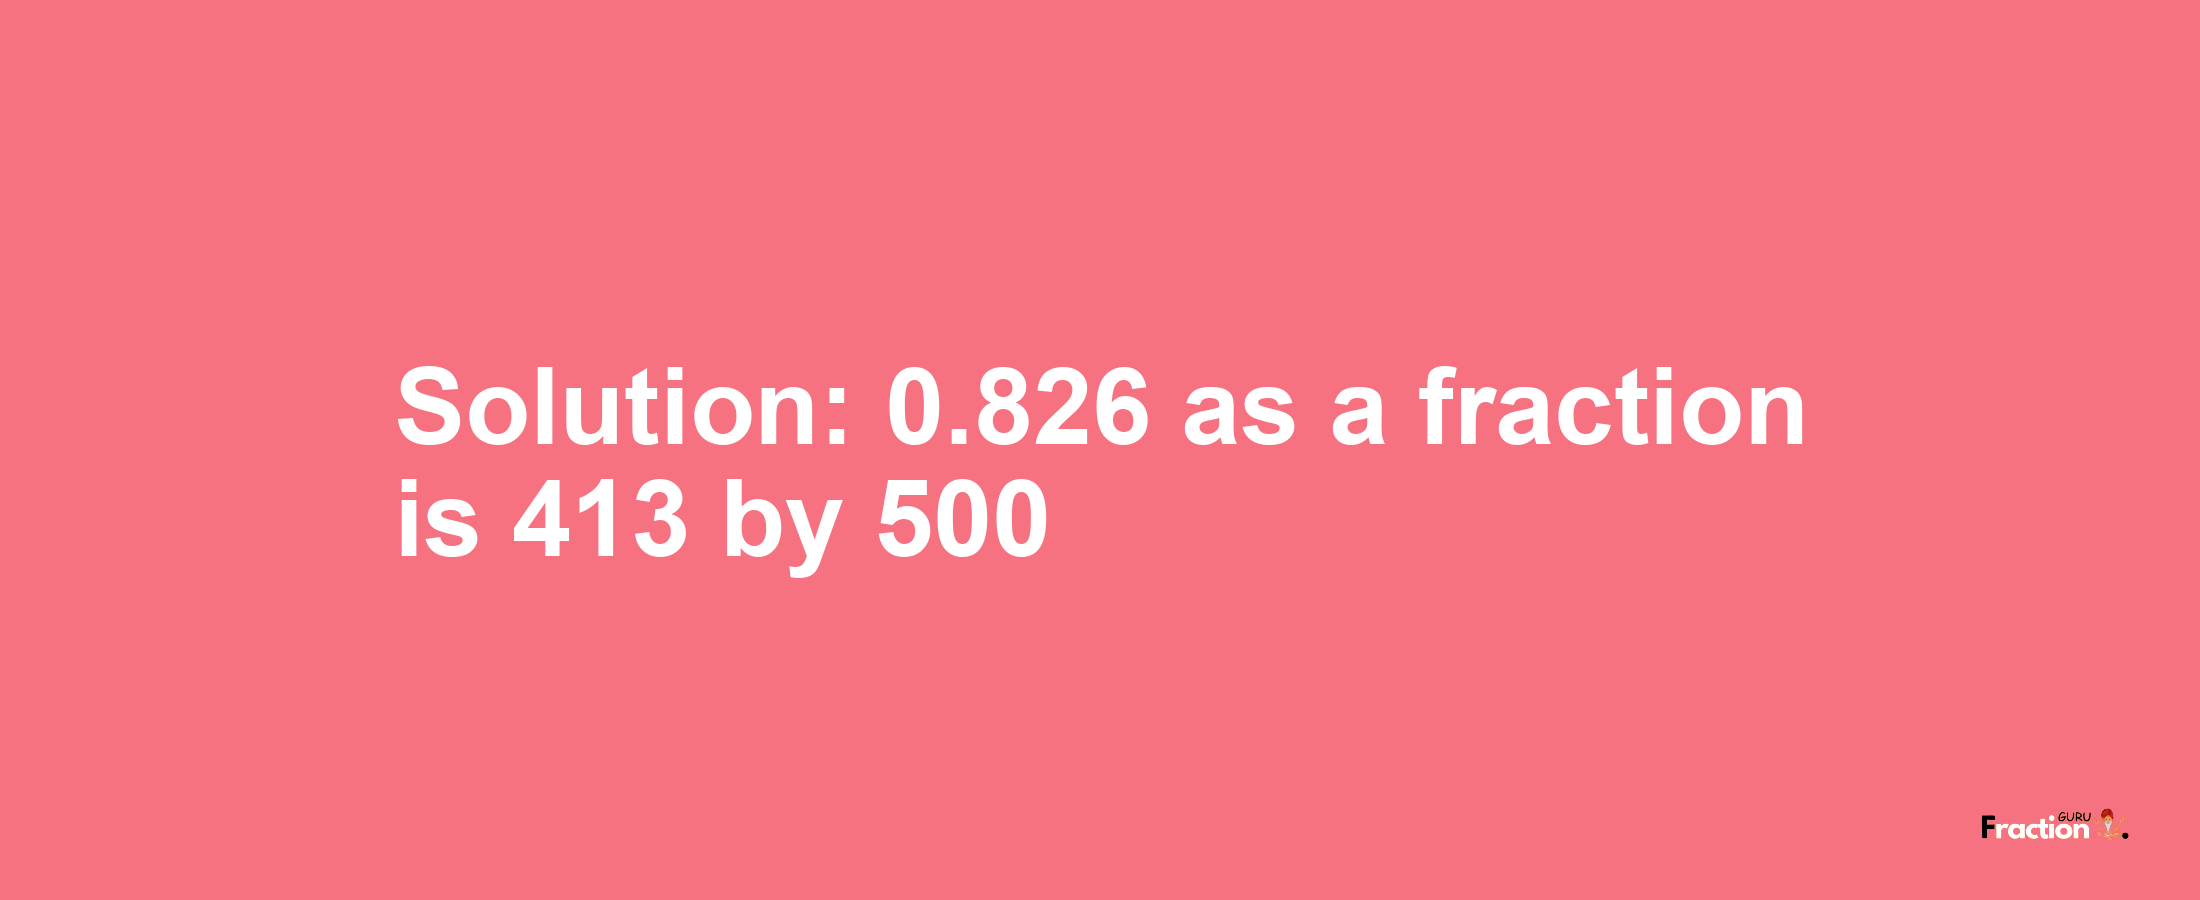 Solution:0.826 as a fraction is 413/500